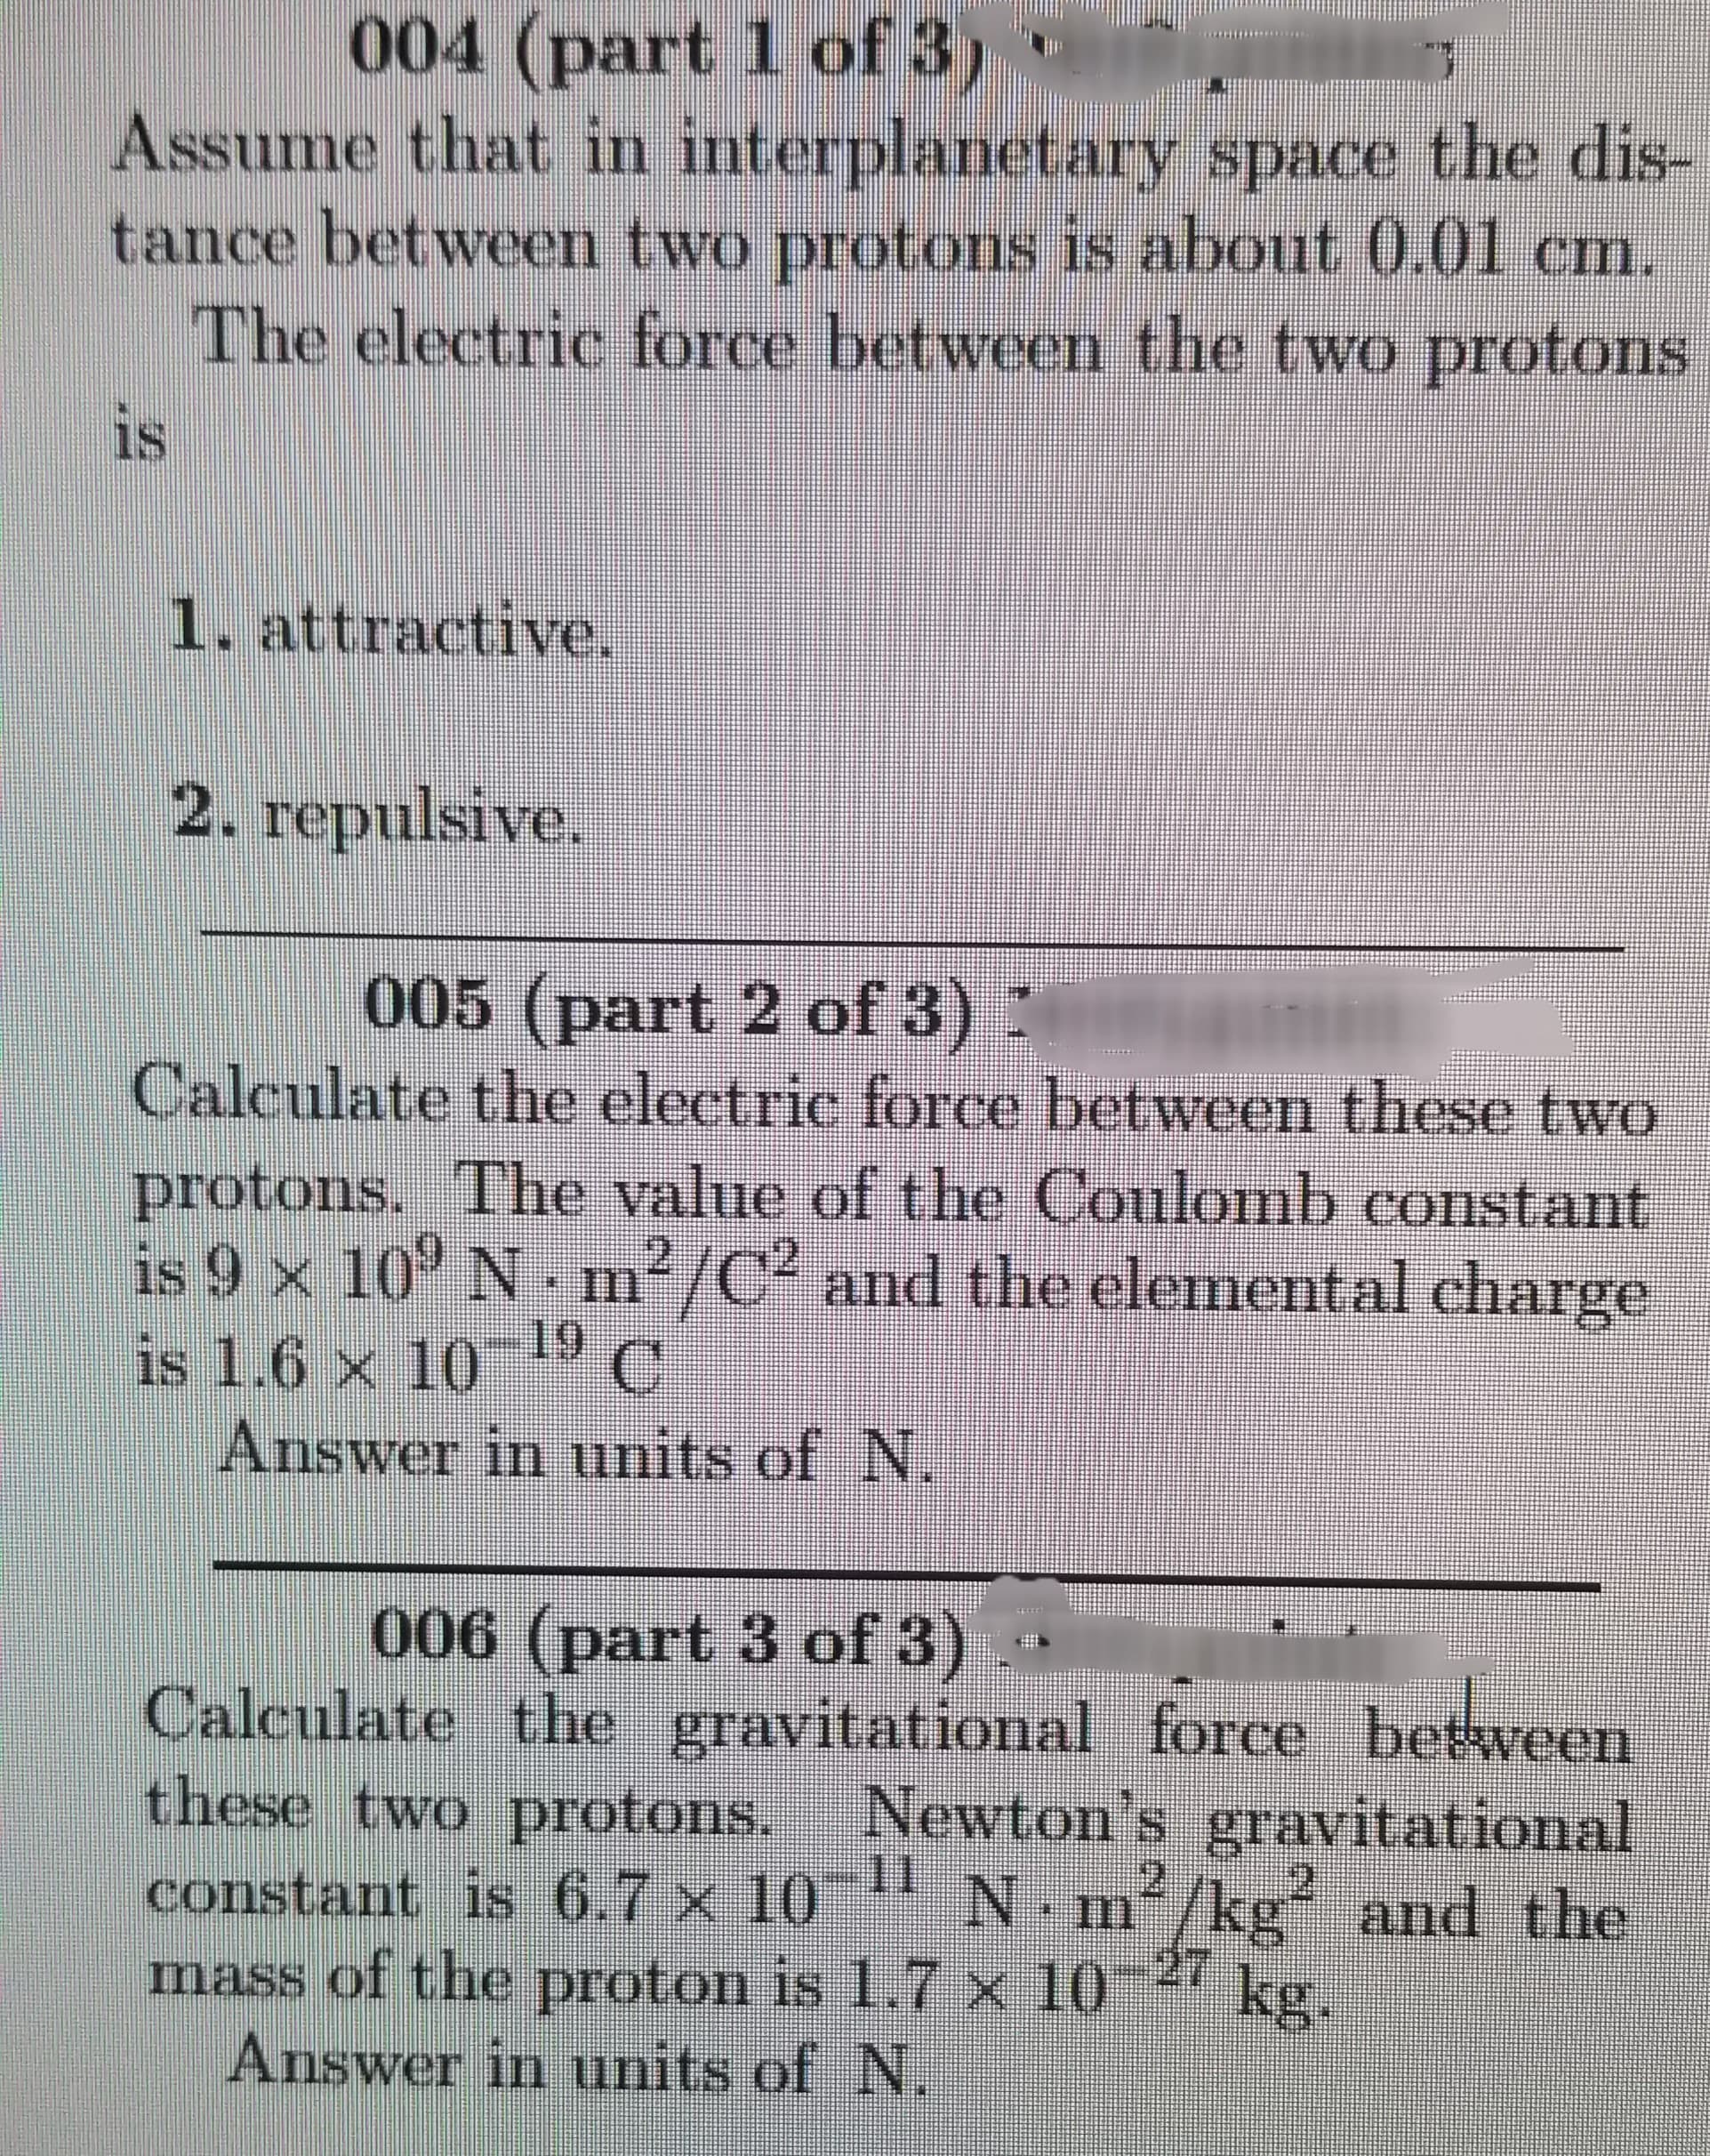 004 (part 1 of 3)
Assume that in interplanetary space the dis-
tance between two protons is about 0.01 cm.
The electric force between the two protons
is
1. attractive.
2. repulsive.
005 (part 2 of 3) *
Calculate the electric force between these two
protons. The value of the Coulomb constant
is 9 x 10° N. m²/C² and the elemental charge
is 1.6 × 10 19 C
Answer in units of N.
006 (part 3 of 3)
Calculate the gravitational force between
these two protons.
Newton's gravitational
11
•m/kg and the
constant is 6.7 x 10
mass of the proton is 1.7 x 10-4 kg.
Answer in units of N.
111
27
